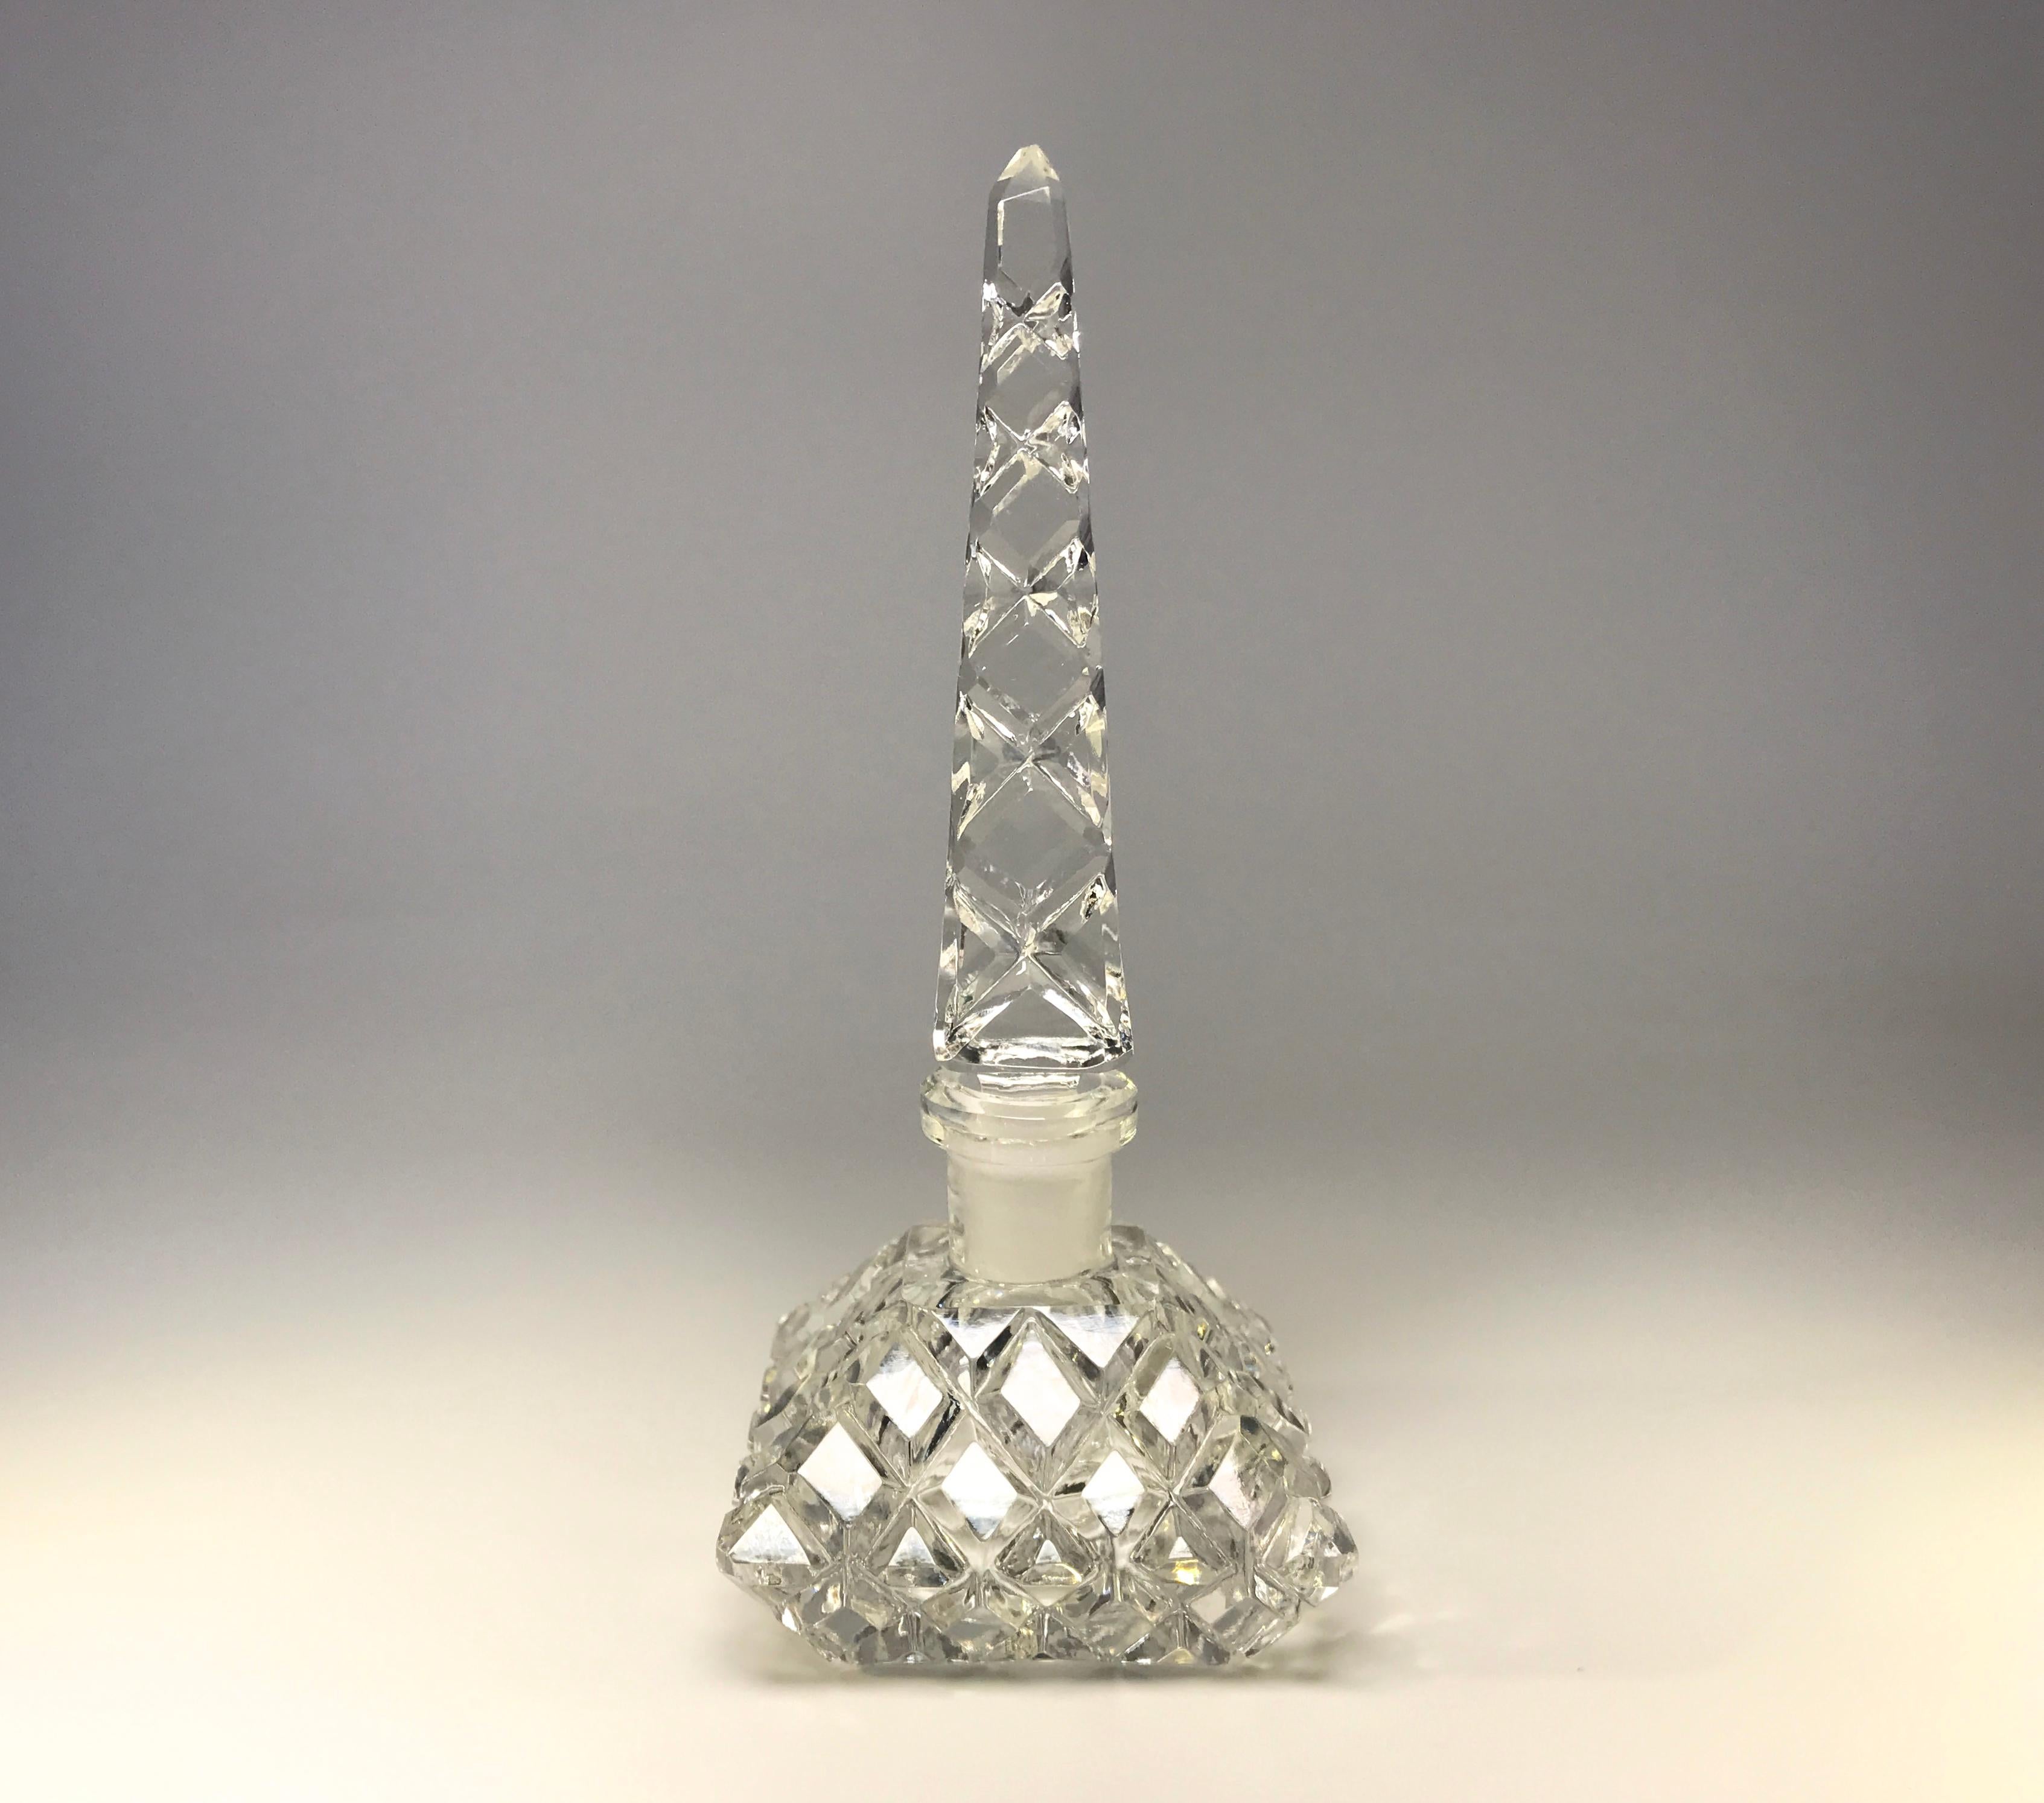 Elegant Czech crystal, clear cushion shaped perfume bottle with a tall spire shaped stopper
Vintage Bohemian, Czech crystal,
circa 1930s
Measures: Height 5.75 inch, width 2.25 inch, depth 2.25 inch
In very good condition. Minuscule fleabites to